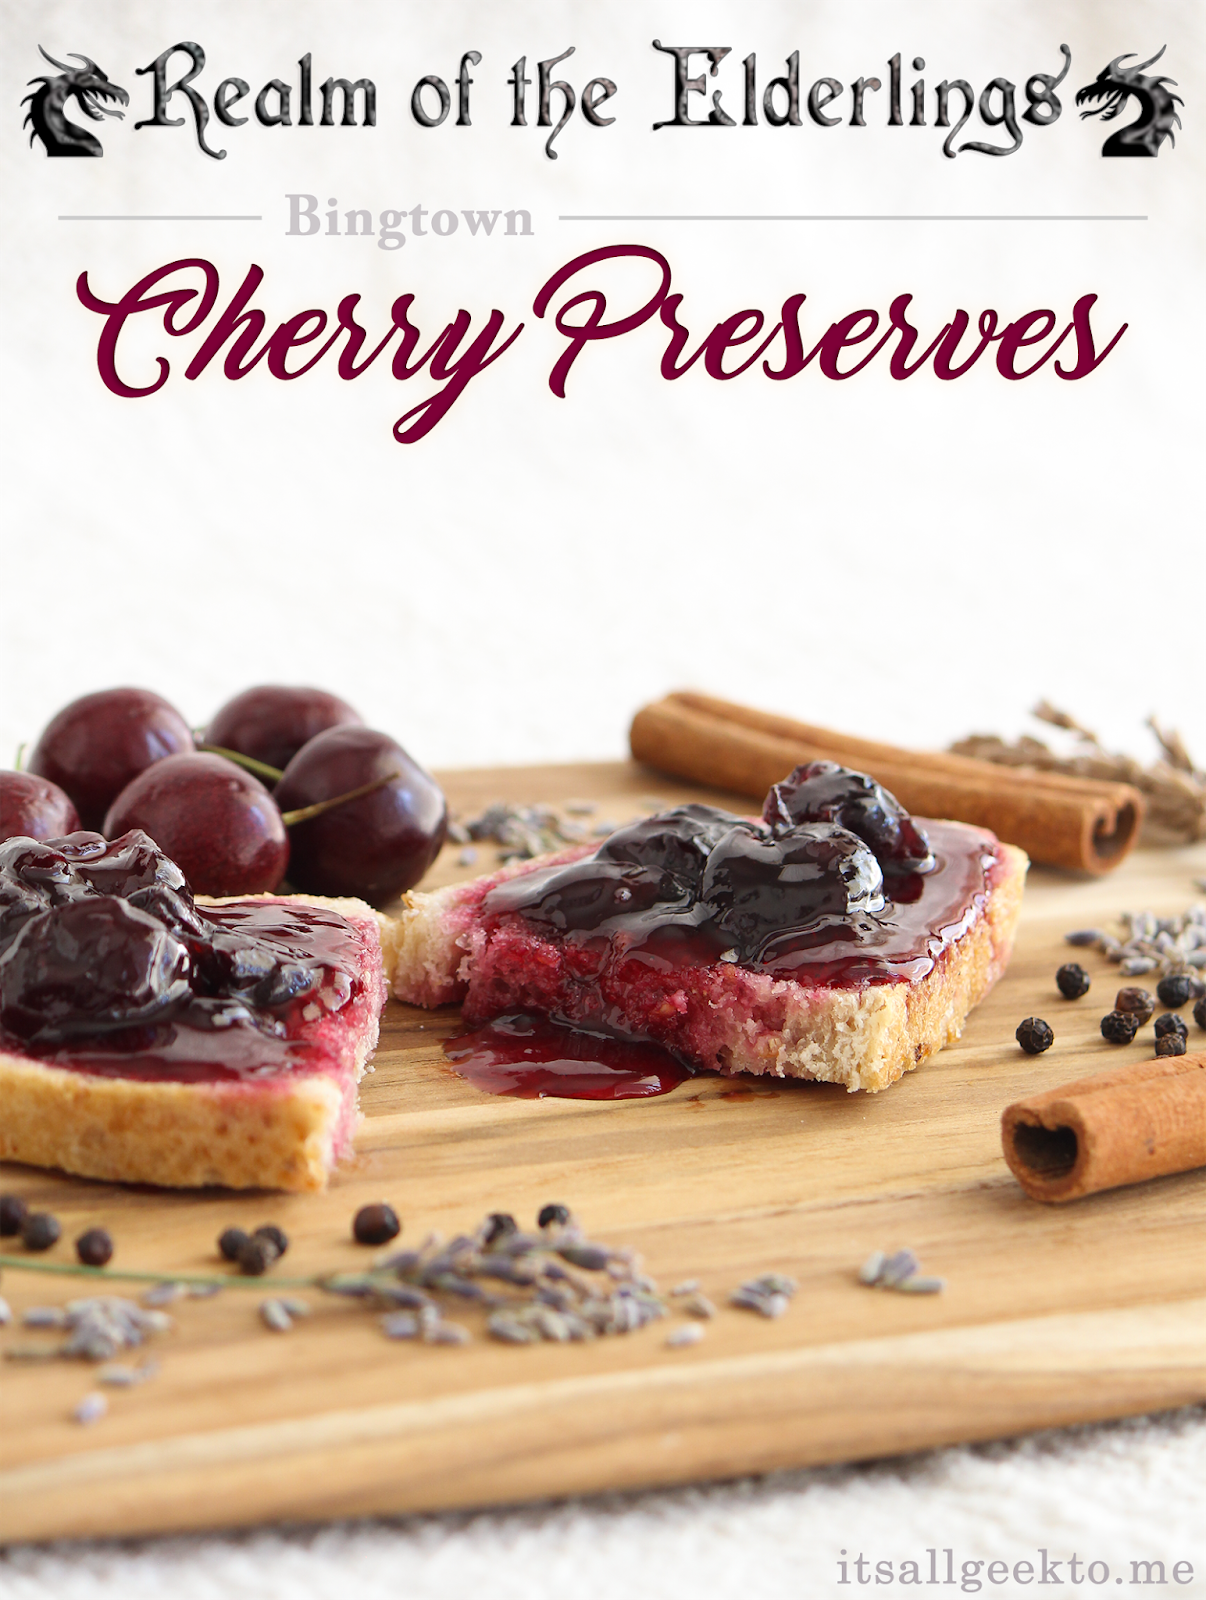 Cherry preserves inspired by Robin Hobb's Realm of the Elderling series, based on a historical recipe.